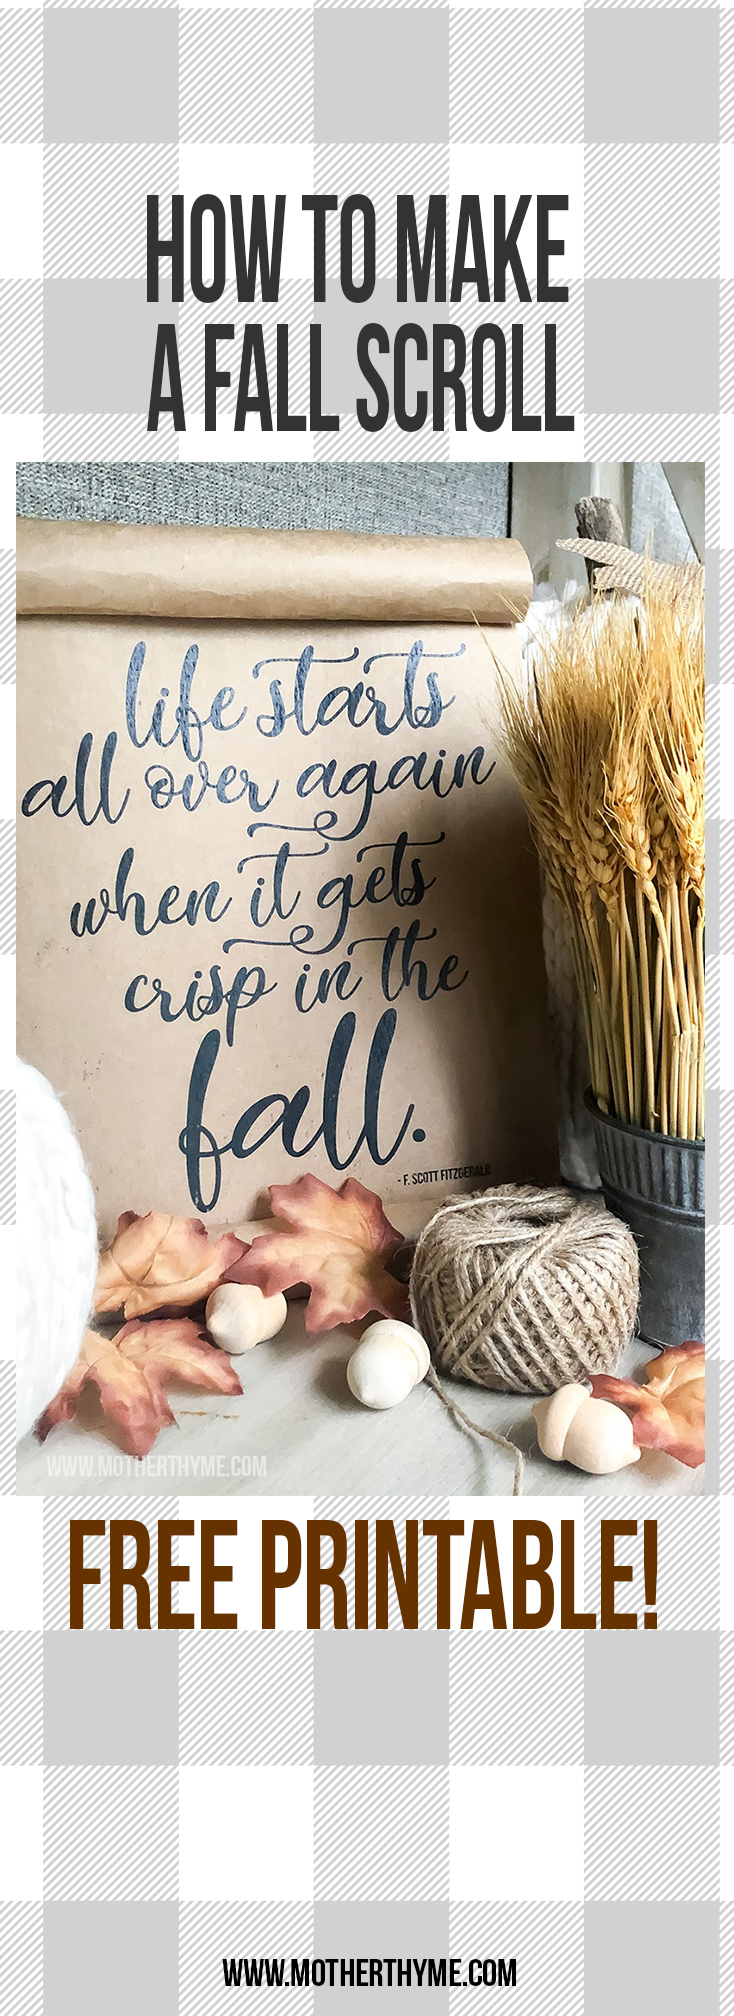 Life Starts Again in the Fall - free printable